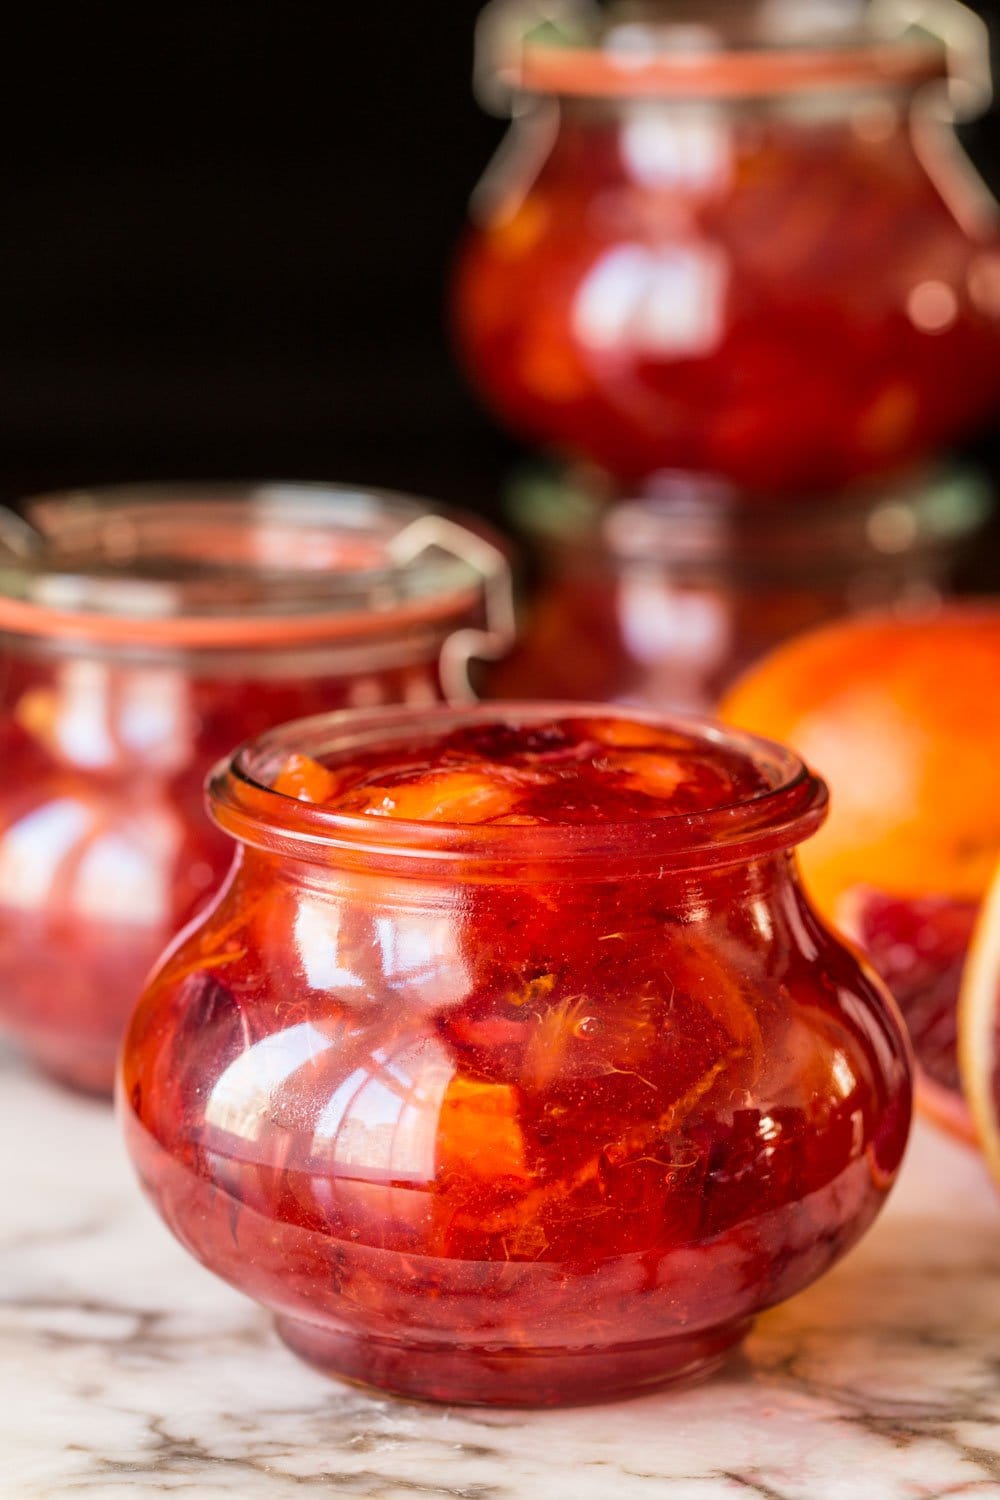 Vertical picture of blood orange marmalade in glass jars